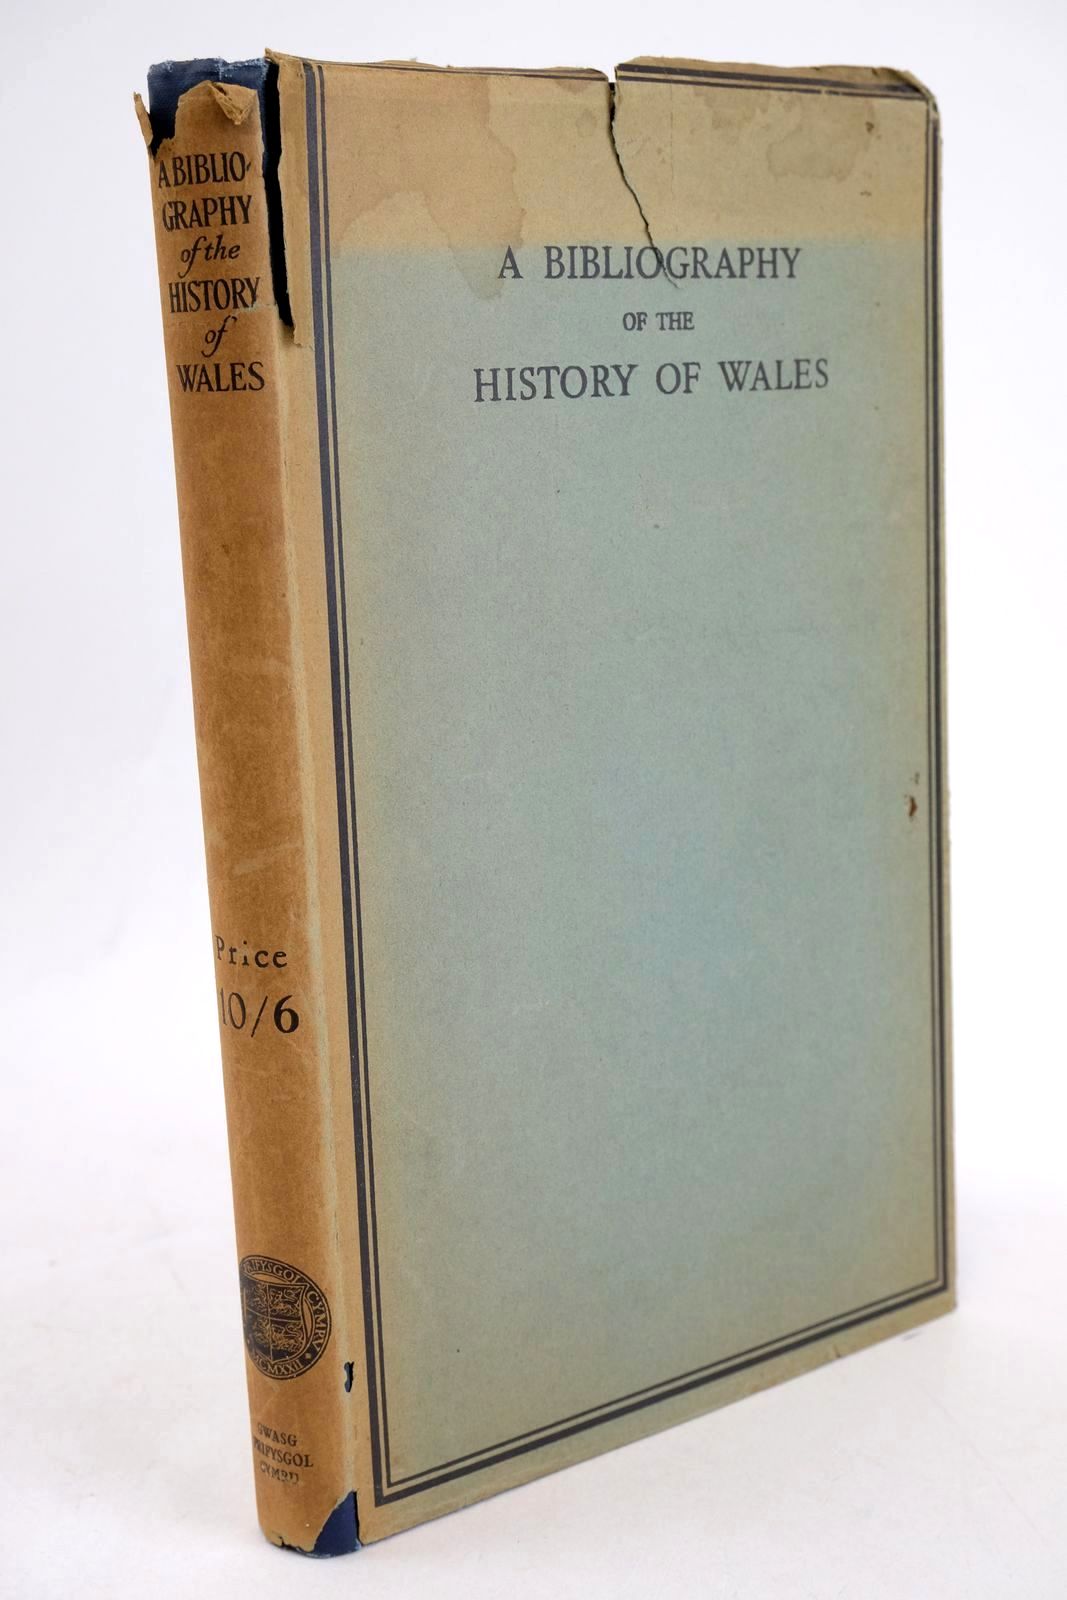 Photo of A BIBLIOGRAPHY OF THE HISTORY OF WALES written by Jenkins, R.T. Rees, William published by University of Wales (STOCK CODE: 1327650)  for sale by Stella & Rose's Books